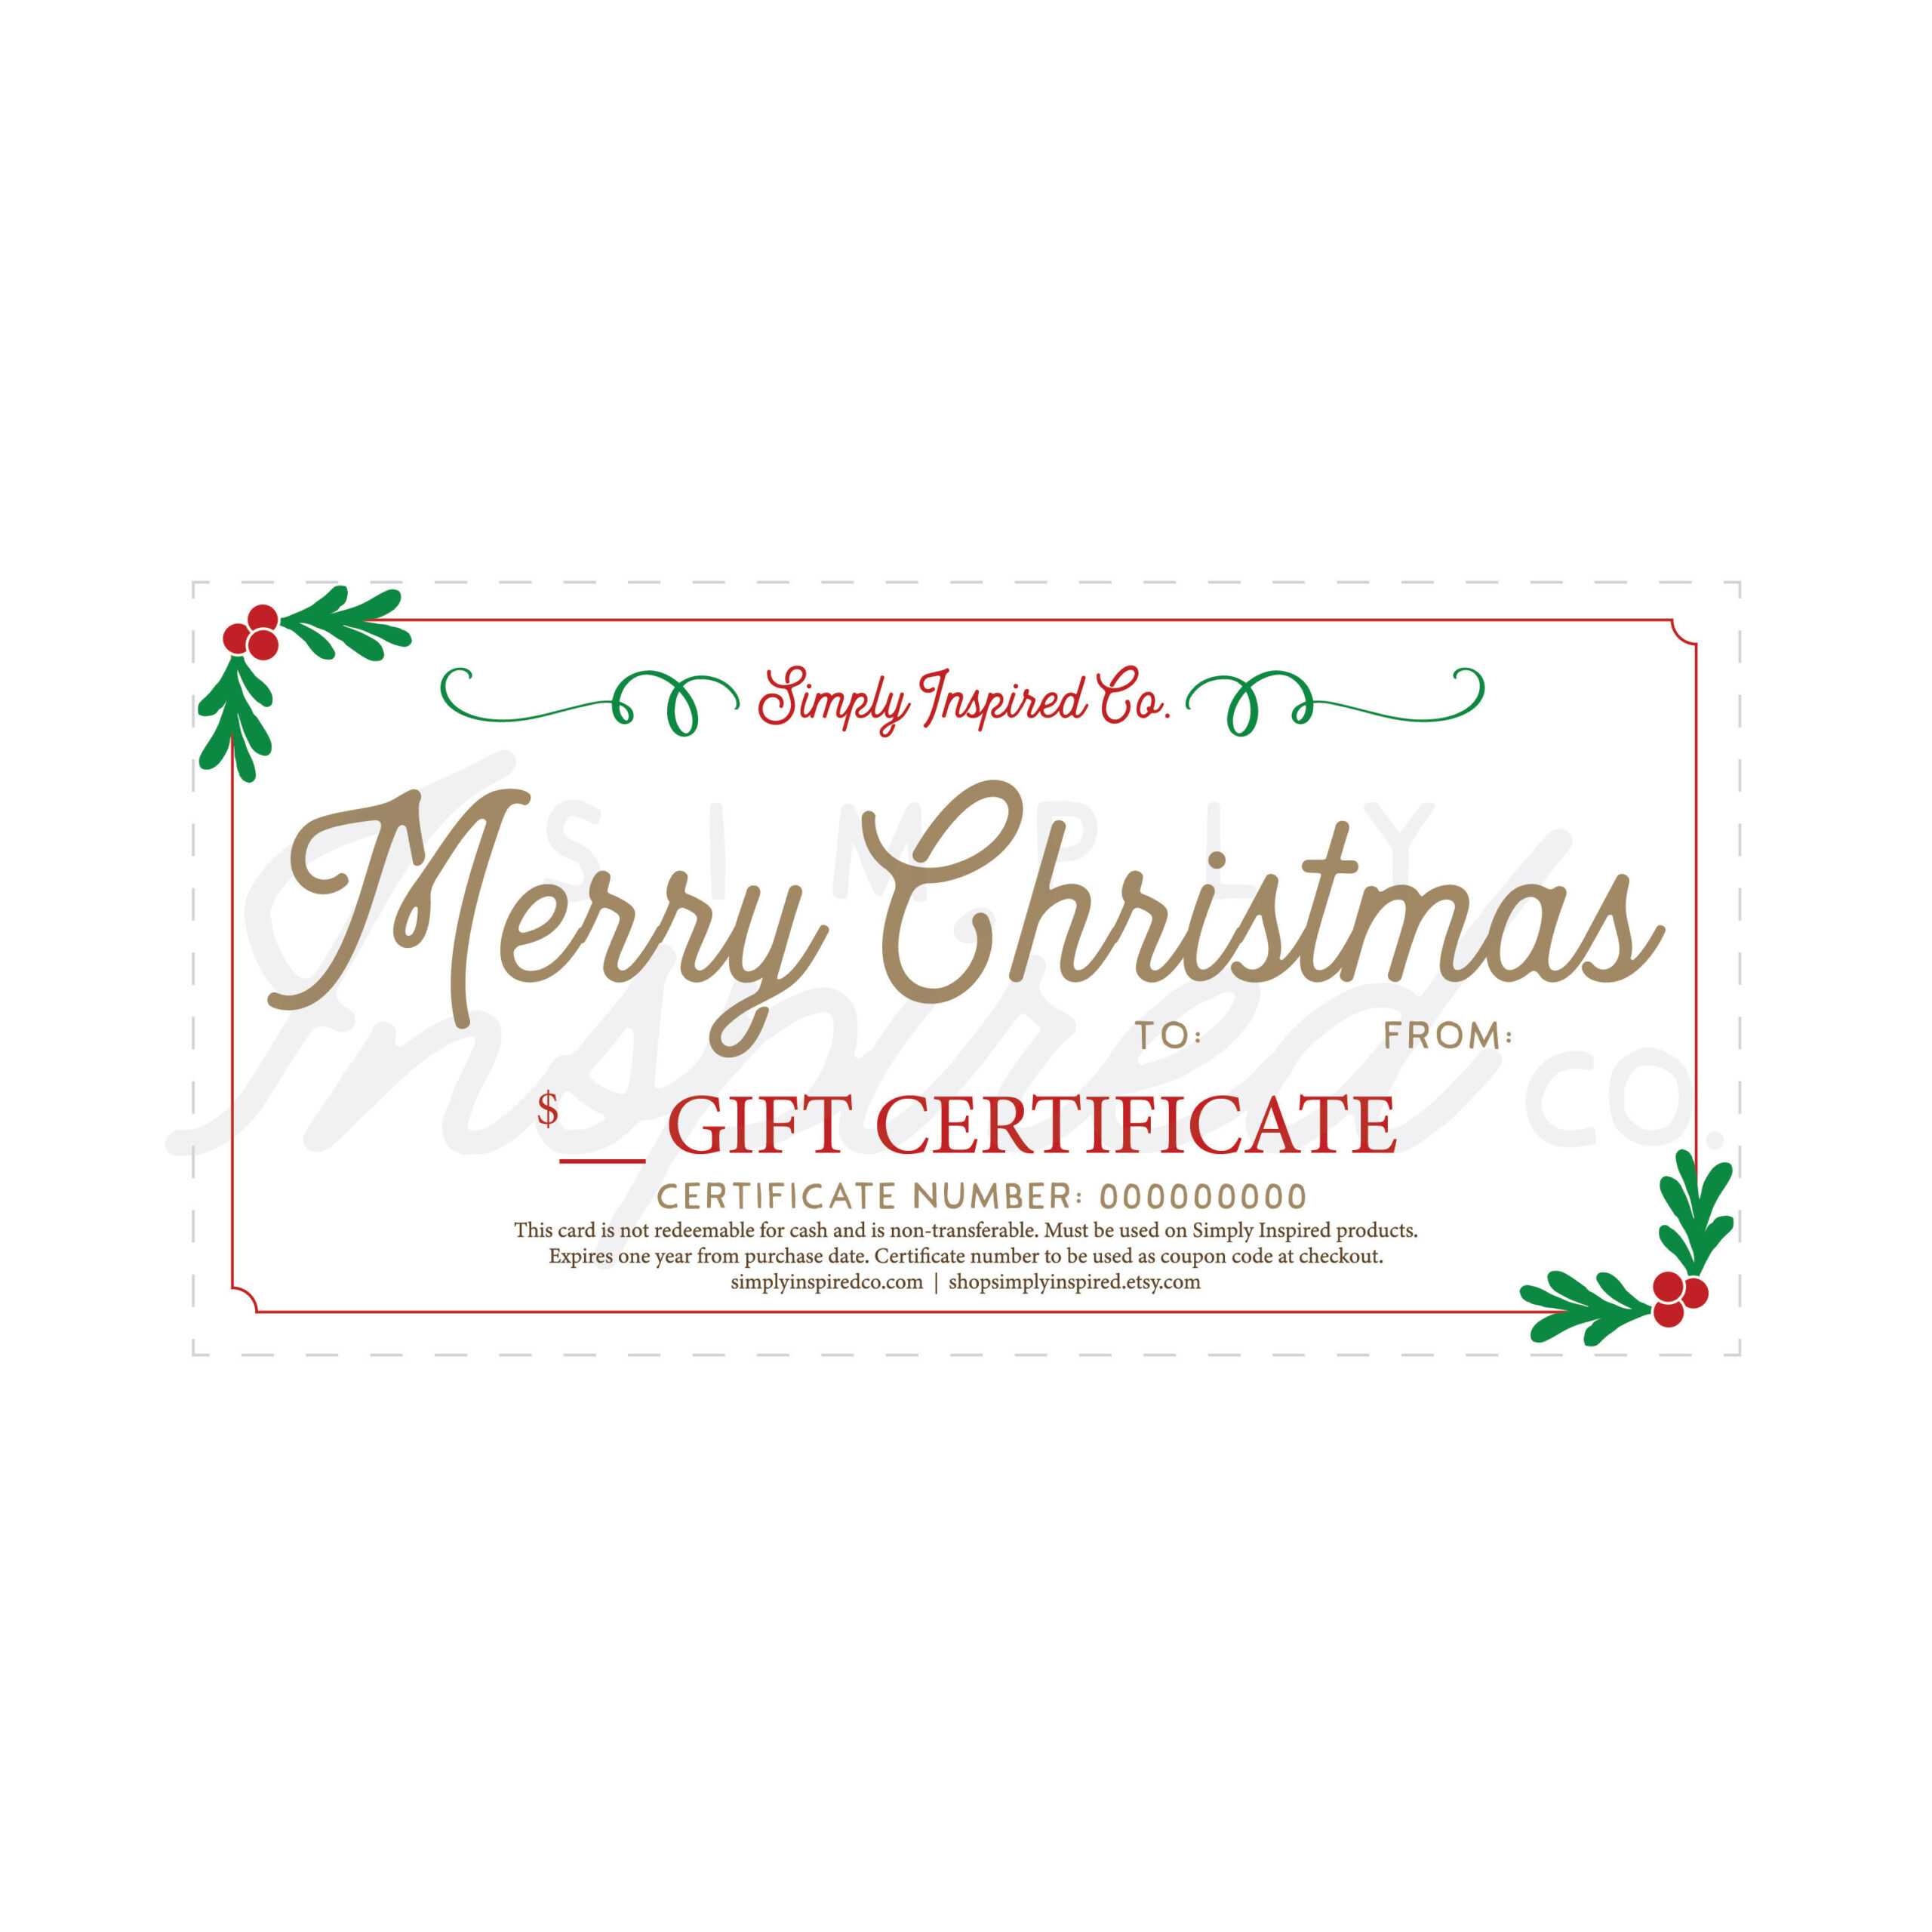 Merry Christmas Gift Certificate – Gift – Christmas – Gift Certificate –  Holidays – Giving – Presents – Gift Card – Simply Inspired Regarding Merry Christmas Gift Certificate Templates